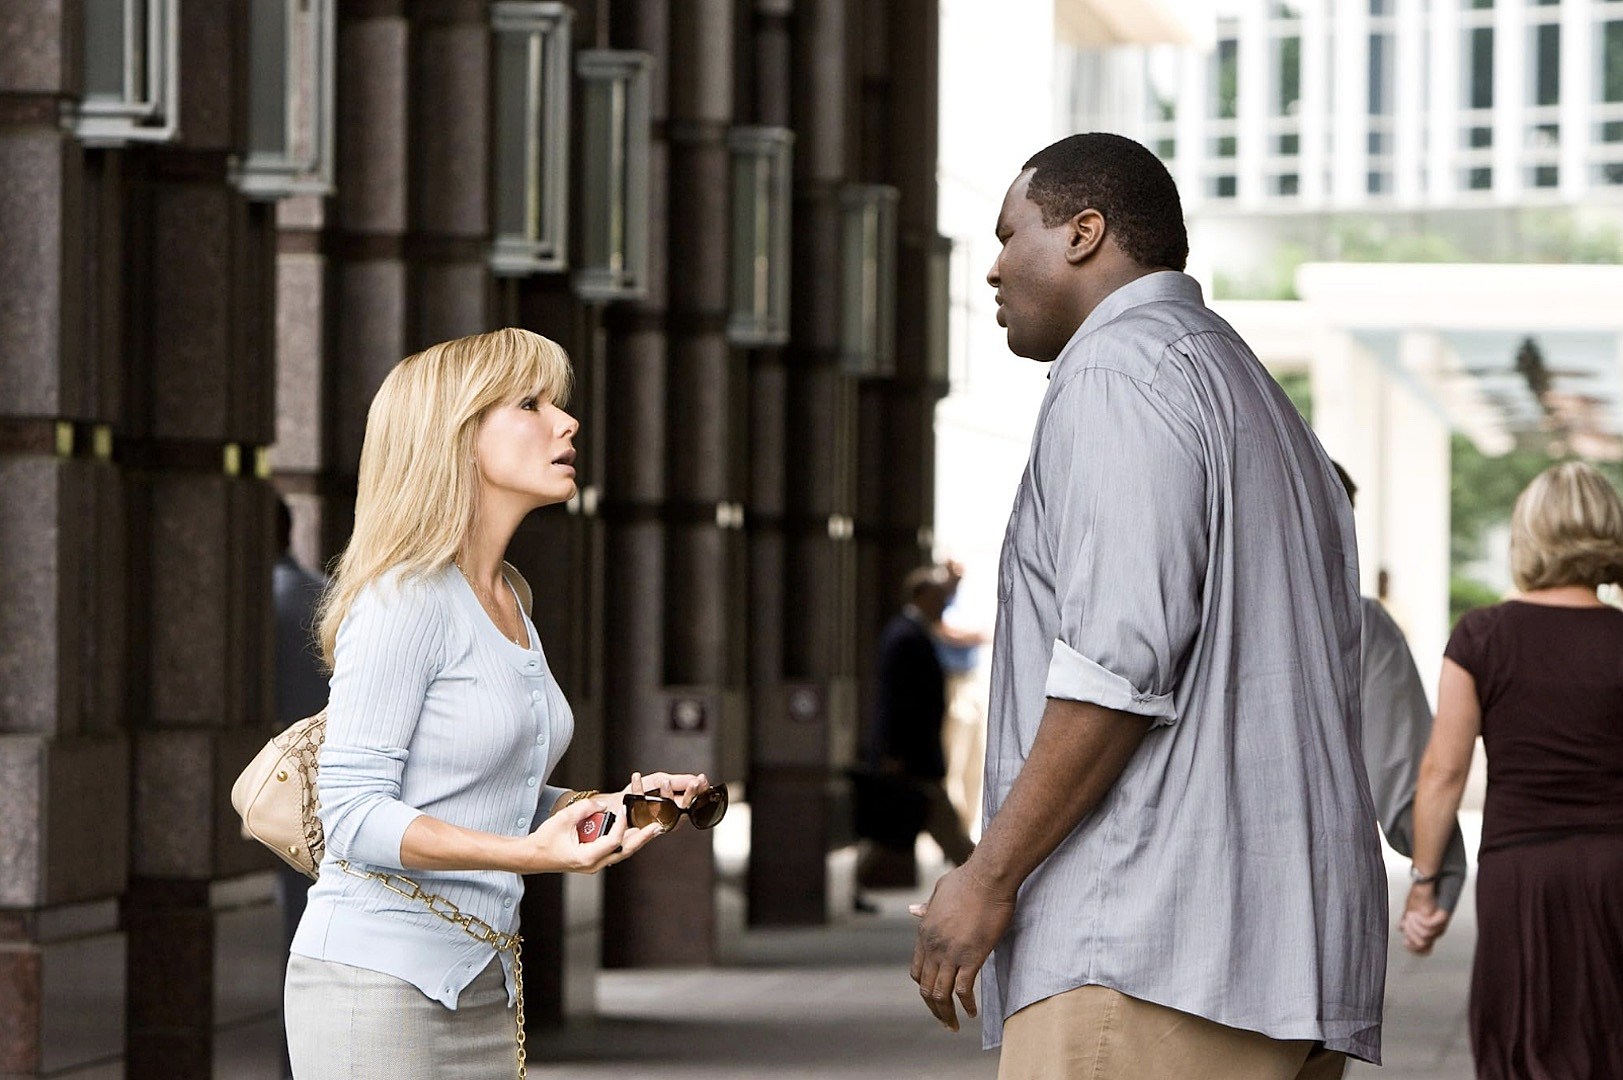 Michael Oher's Quotes About the Tuohy Family Before Lawsuit